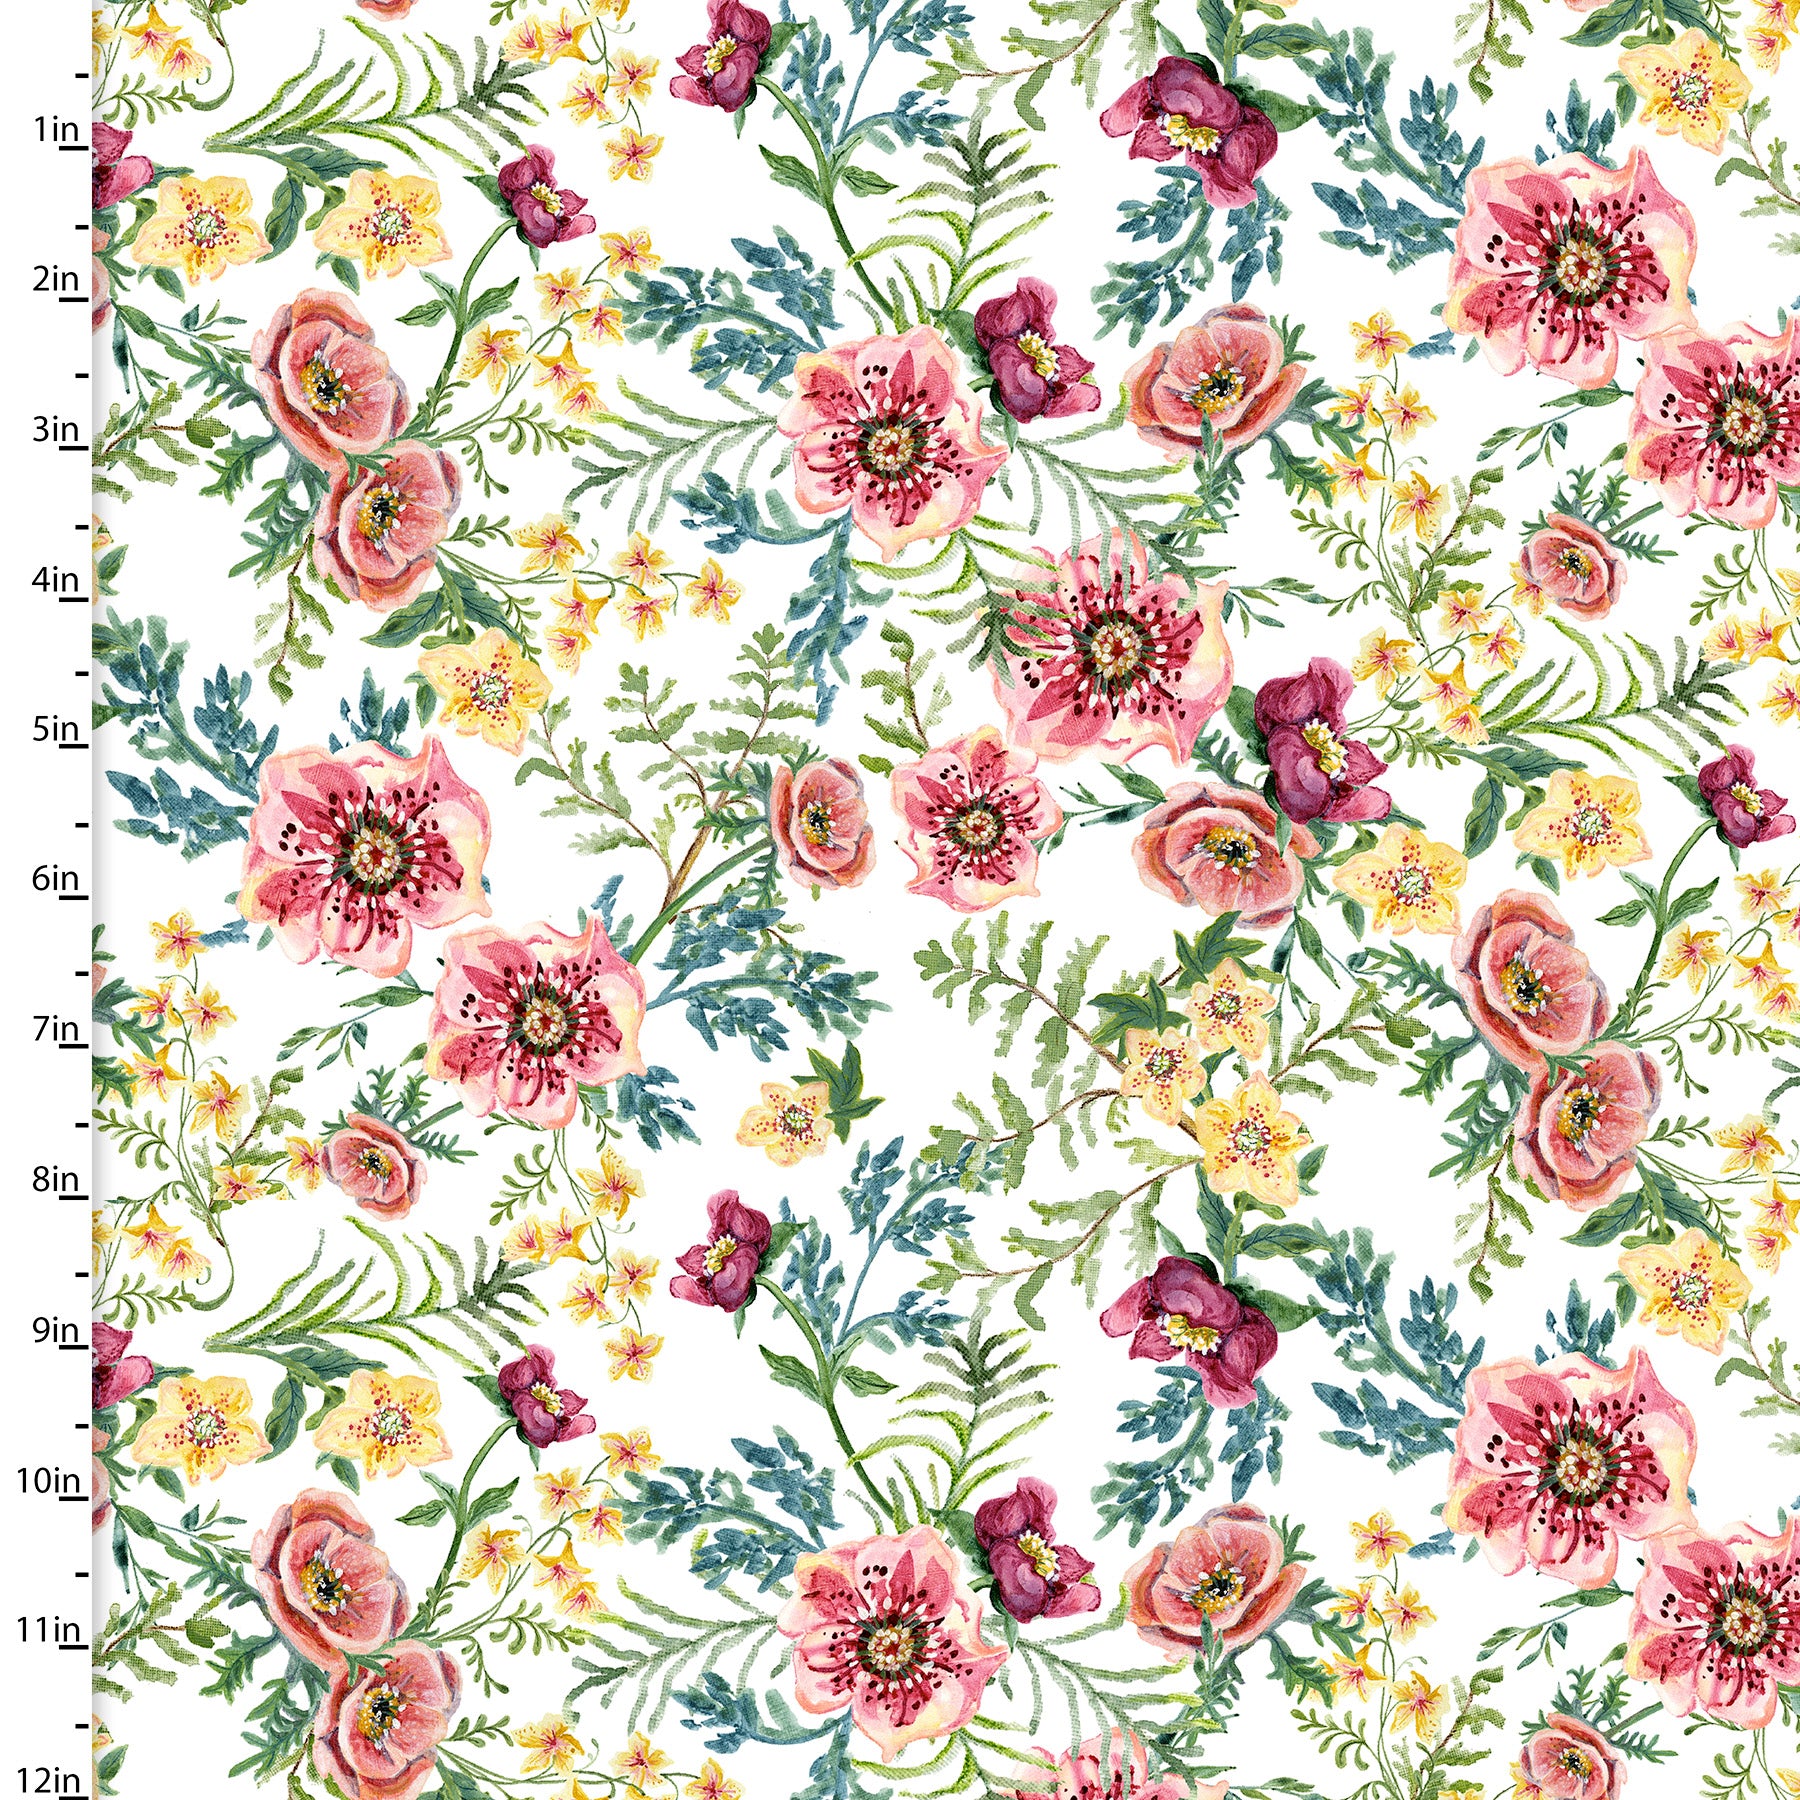 White cotton fabric with pink and yellow flowers by 3 Wises